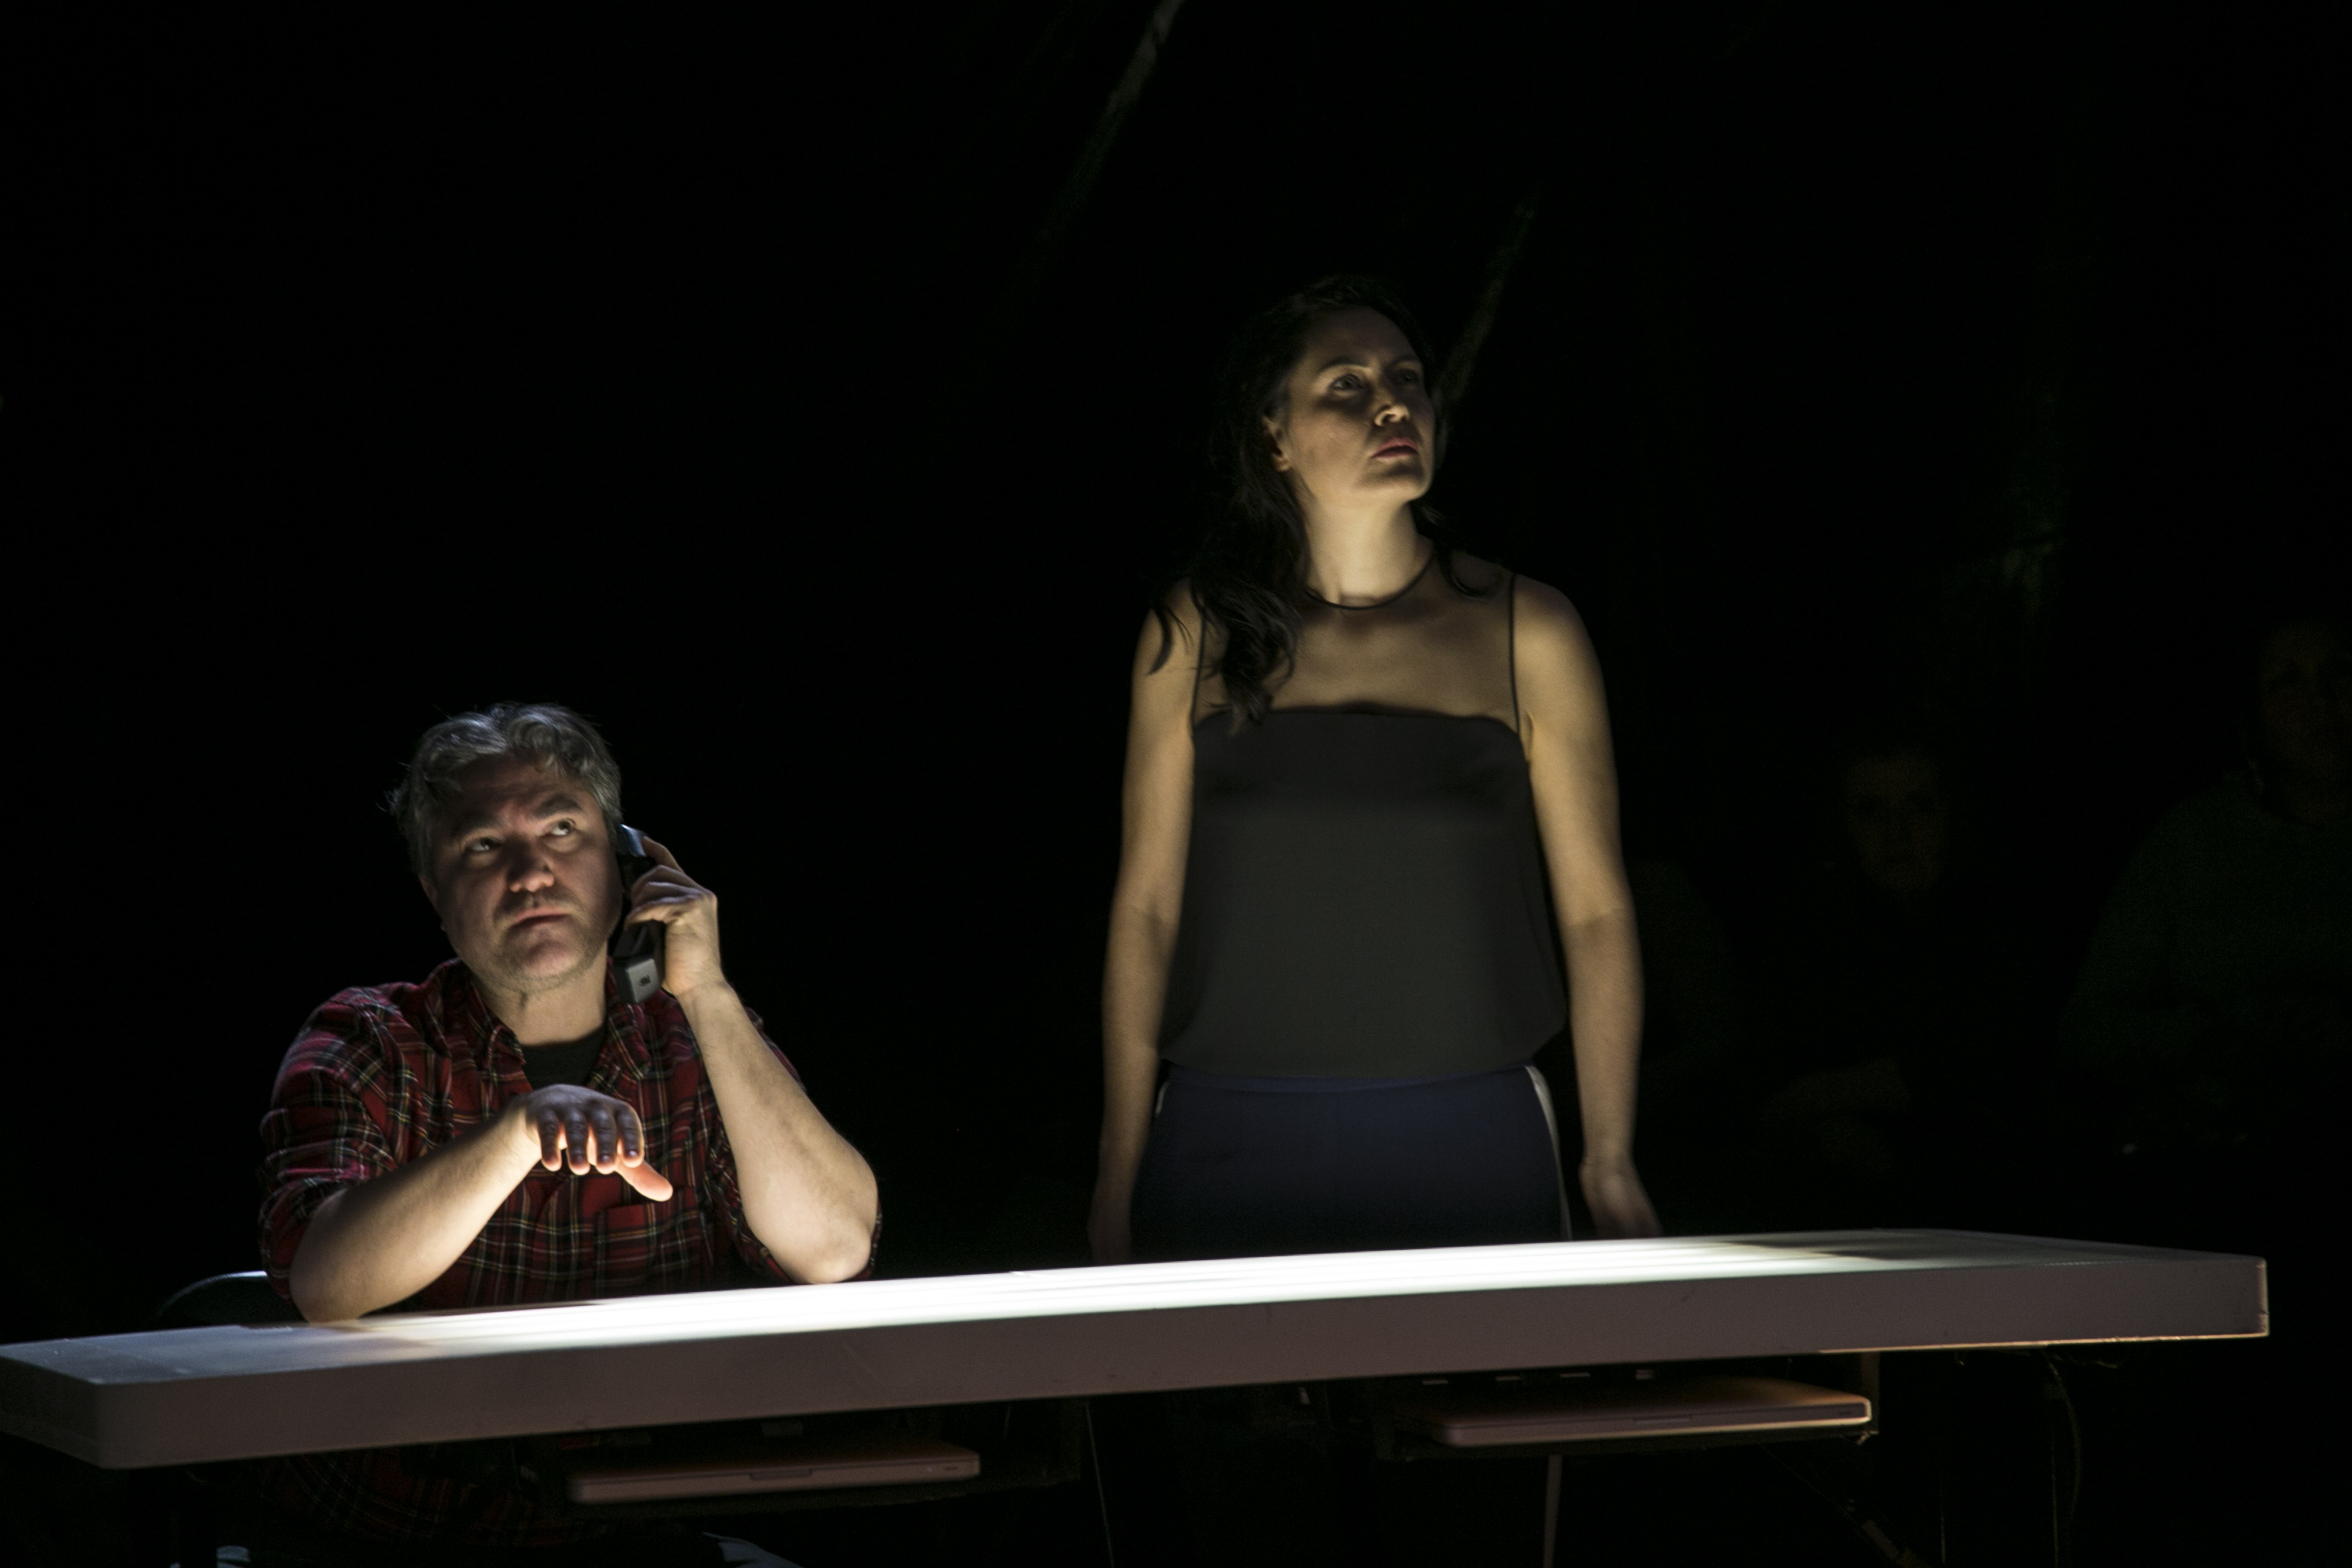 Kevin Loring and Quelemia Sparrow in Act 1 of "The Pipeline Project". Photo by Matt Reznek.